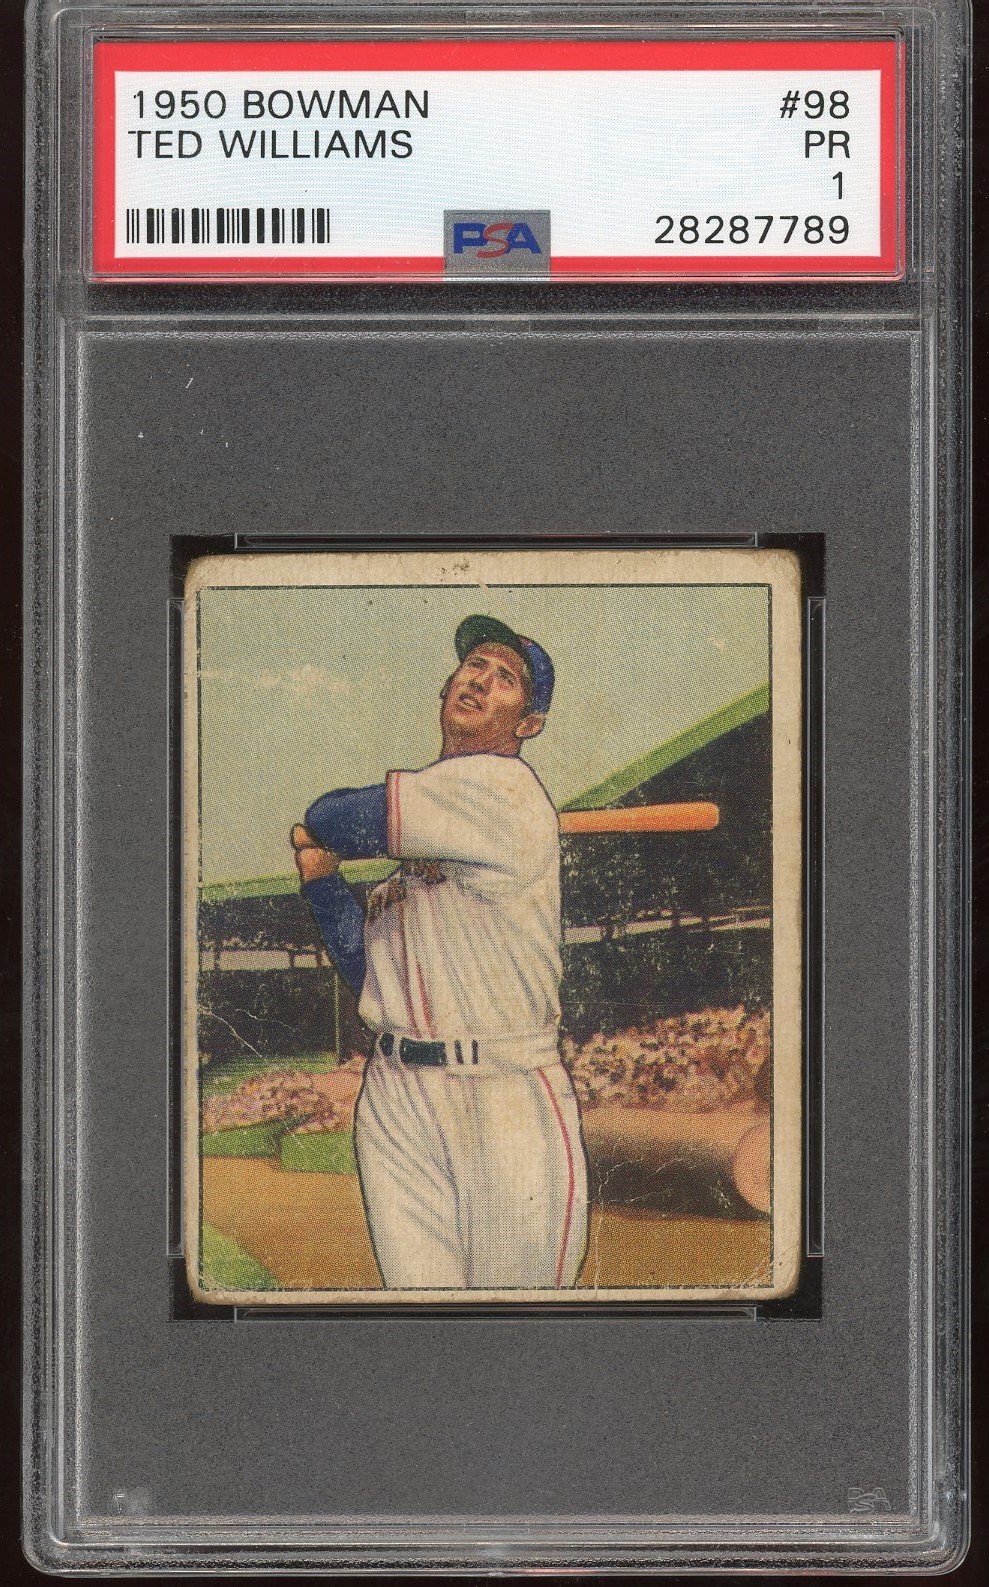 - 1941 Play Ball & 1950 Bowman HOFer PSA Graded Lot of 4 with Ted Williams